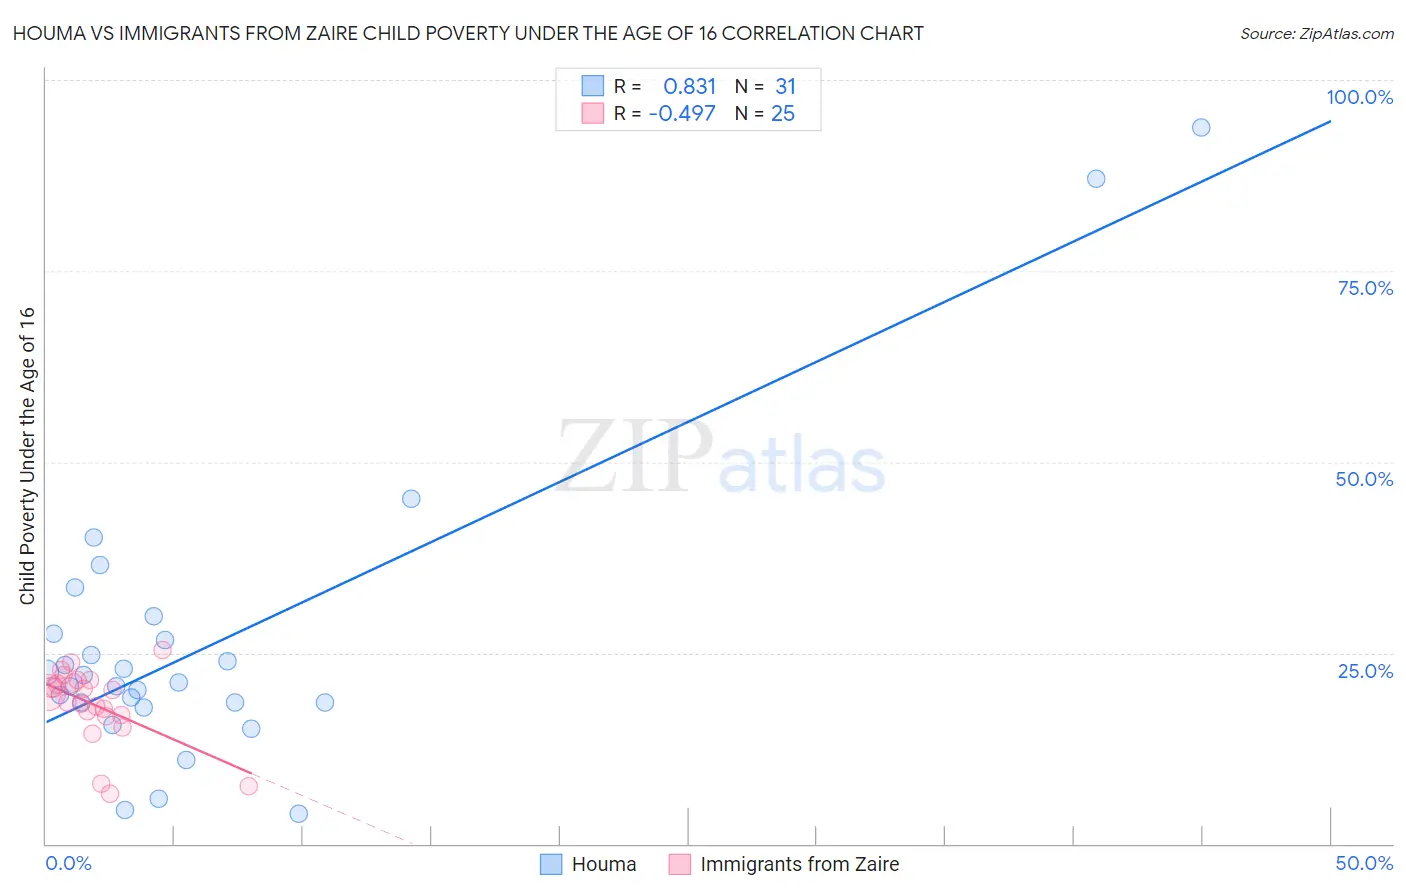 Houma vs Immigrants from Zaire Child Poverty Under the Age of 16